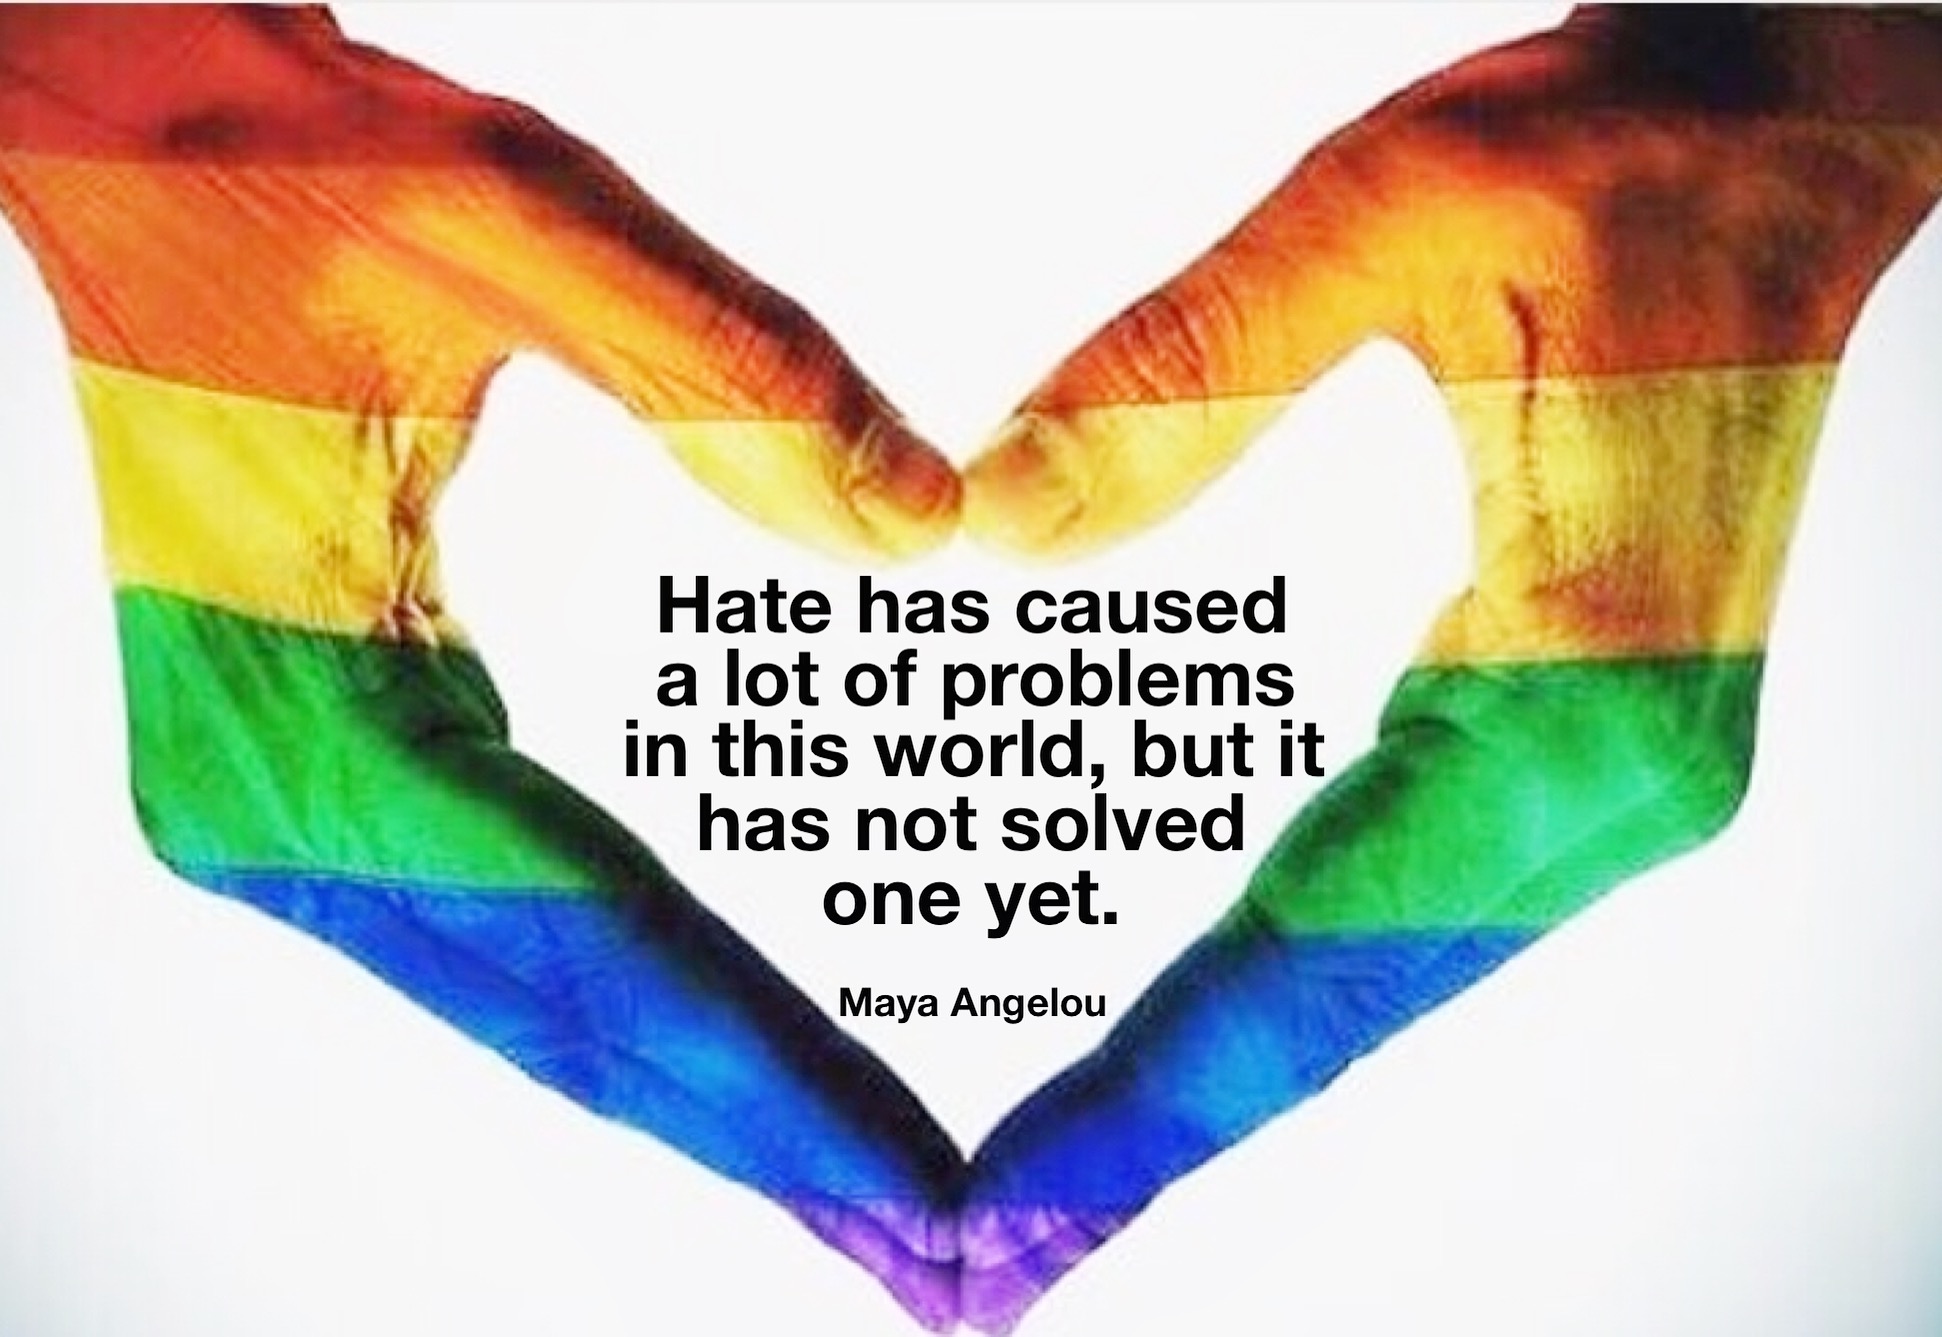 Hate has caused a lot of problems in this world, but it has not solved one yet.